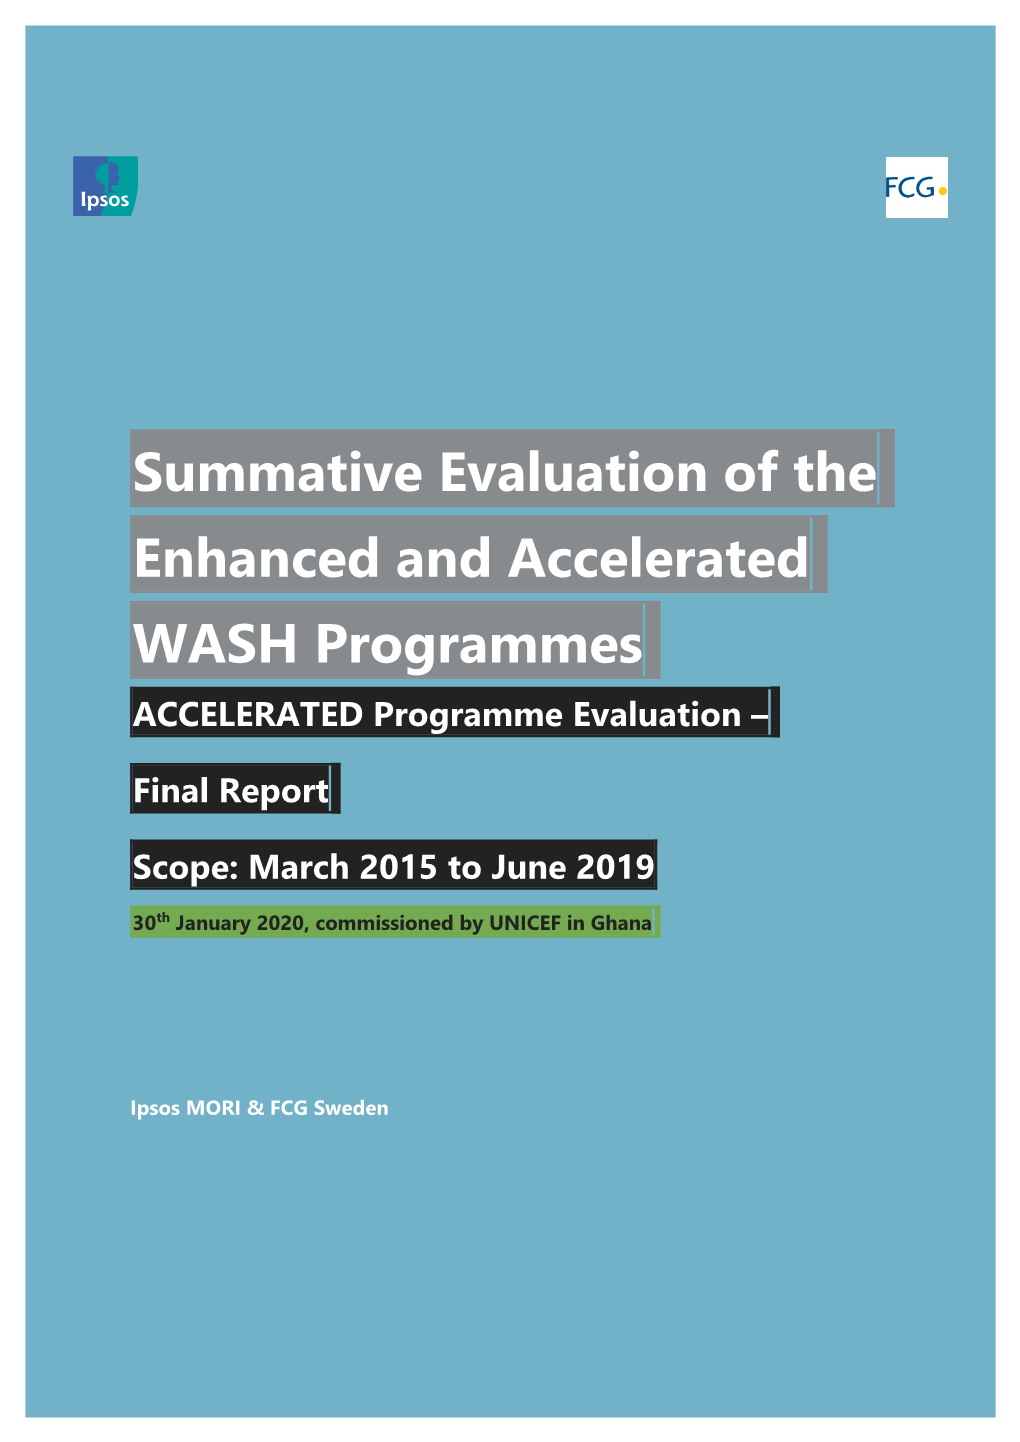 ACCELERATED Programme Evaluation –